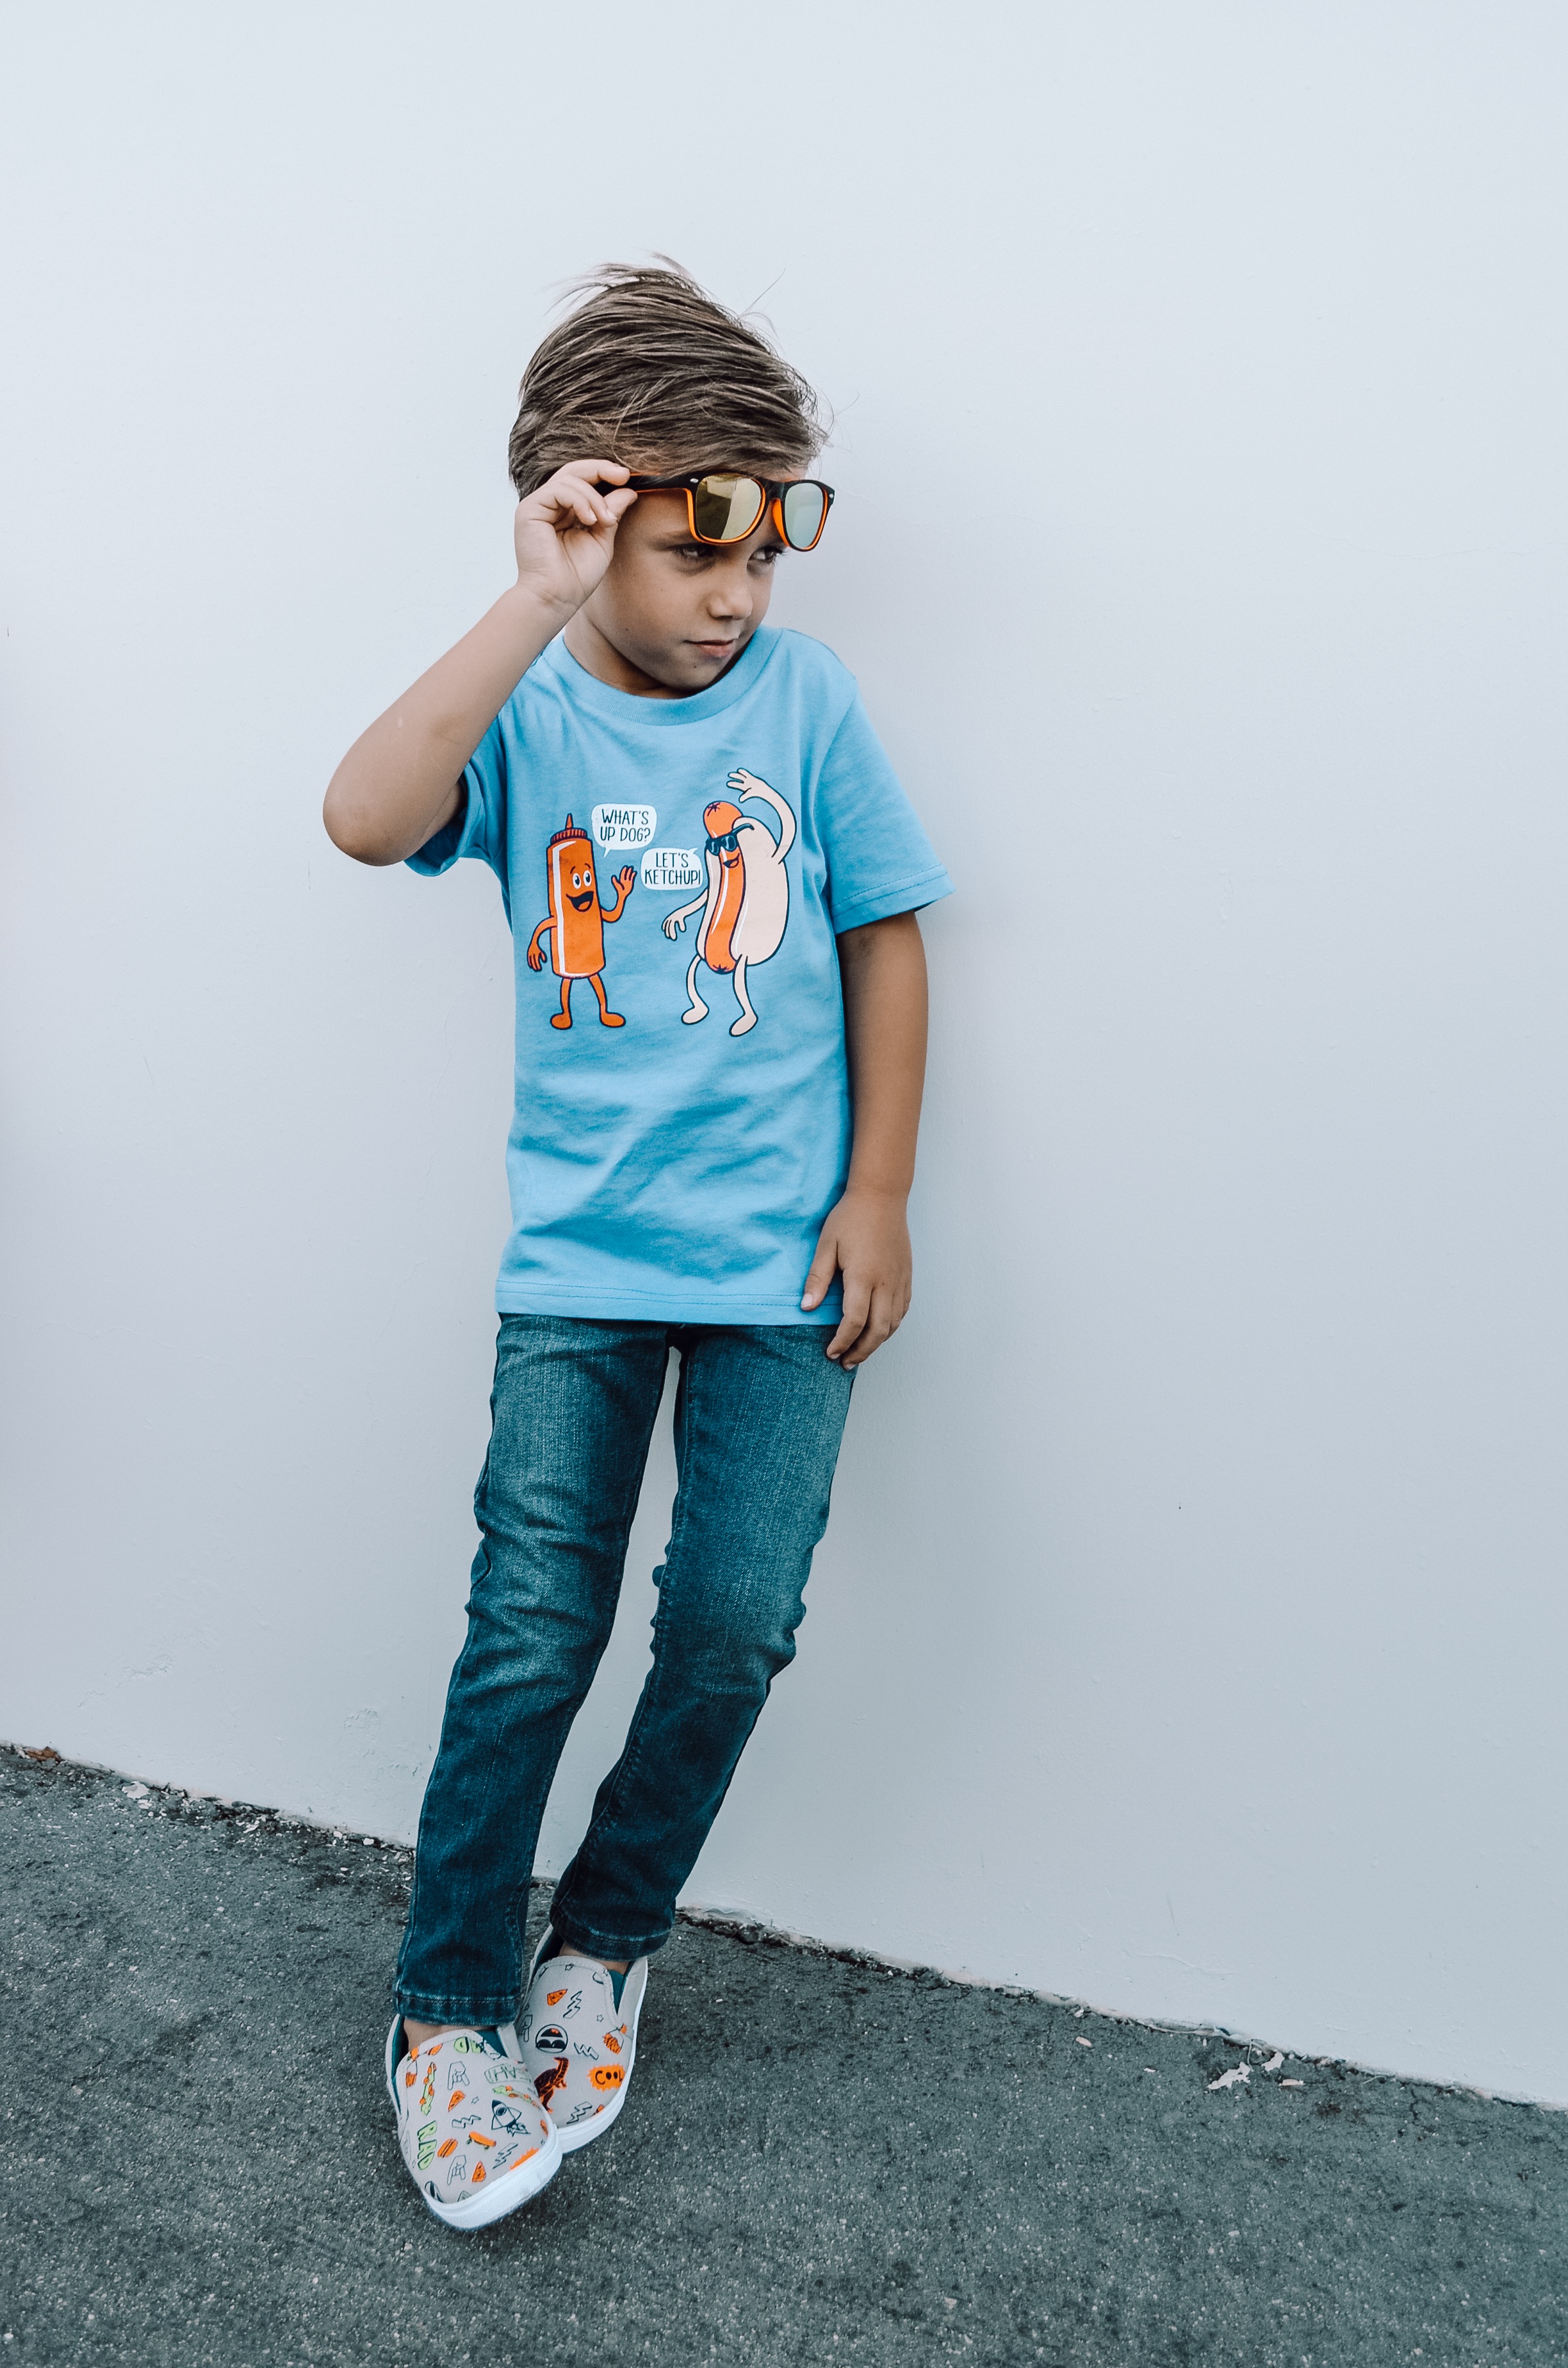 BACK TO SCHOOL WITH FABKIDS- Jaclyn De Leon Style + KID STYLE + HIGH TOPS + SUNGLASSES + KID LIFE + MOM LIFE + GETTING READY FOR SCHOOL + CHILDREN SNEAKERS + GRAPHIC TEE + DENIM + KIDS FOR REAL + FALL STYLE + SCHOOL OUTFITS